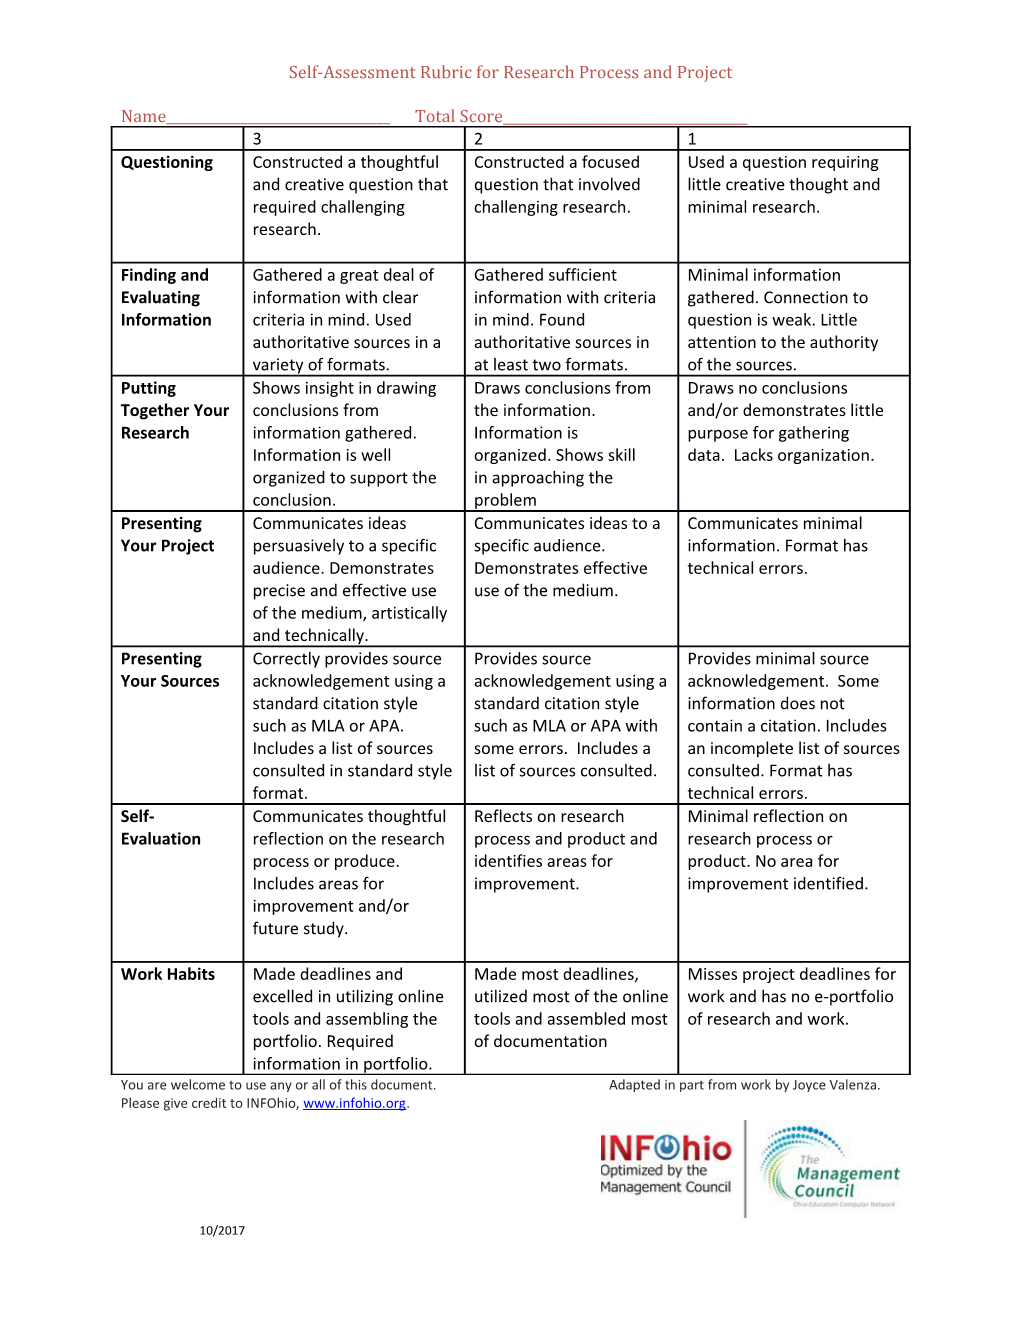 Self-Assessment Rubric for Research Process and Project